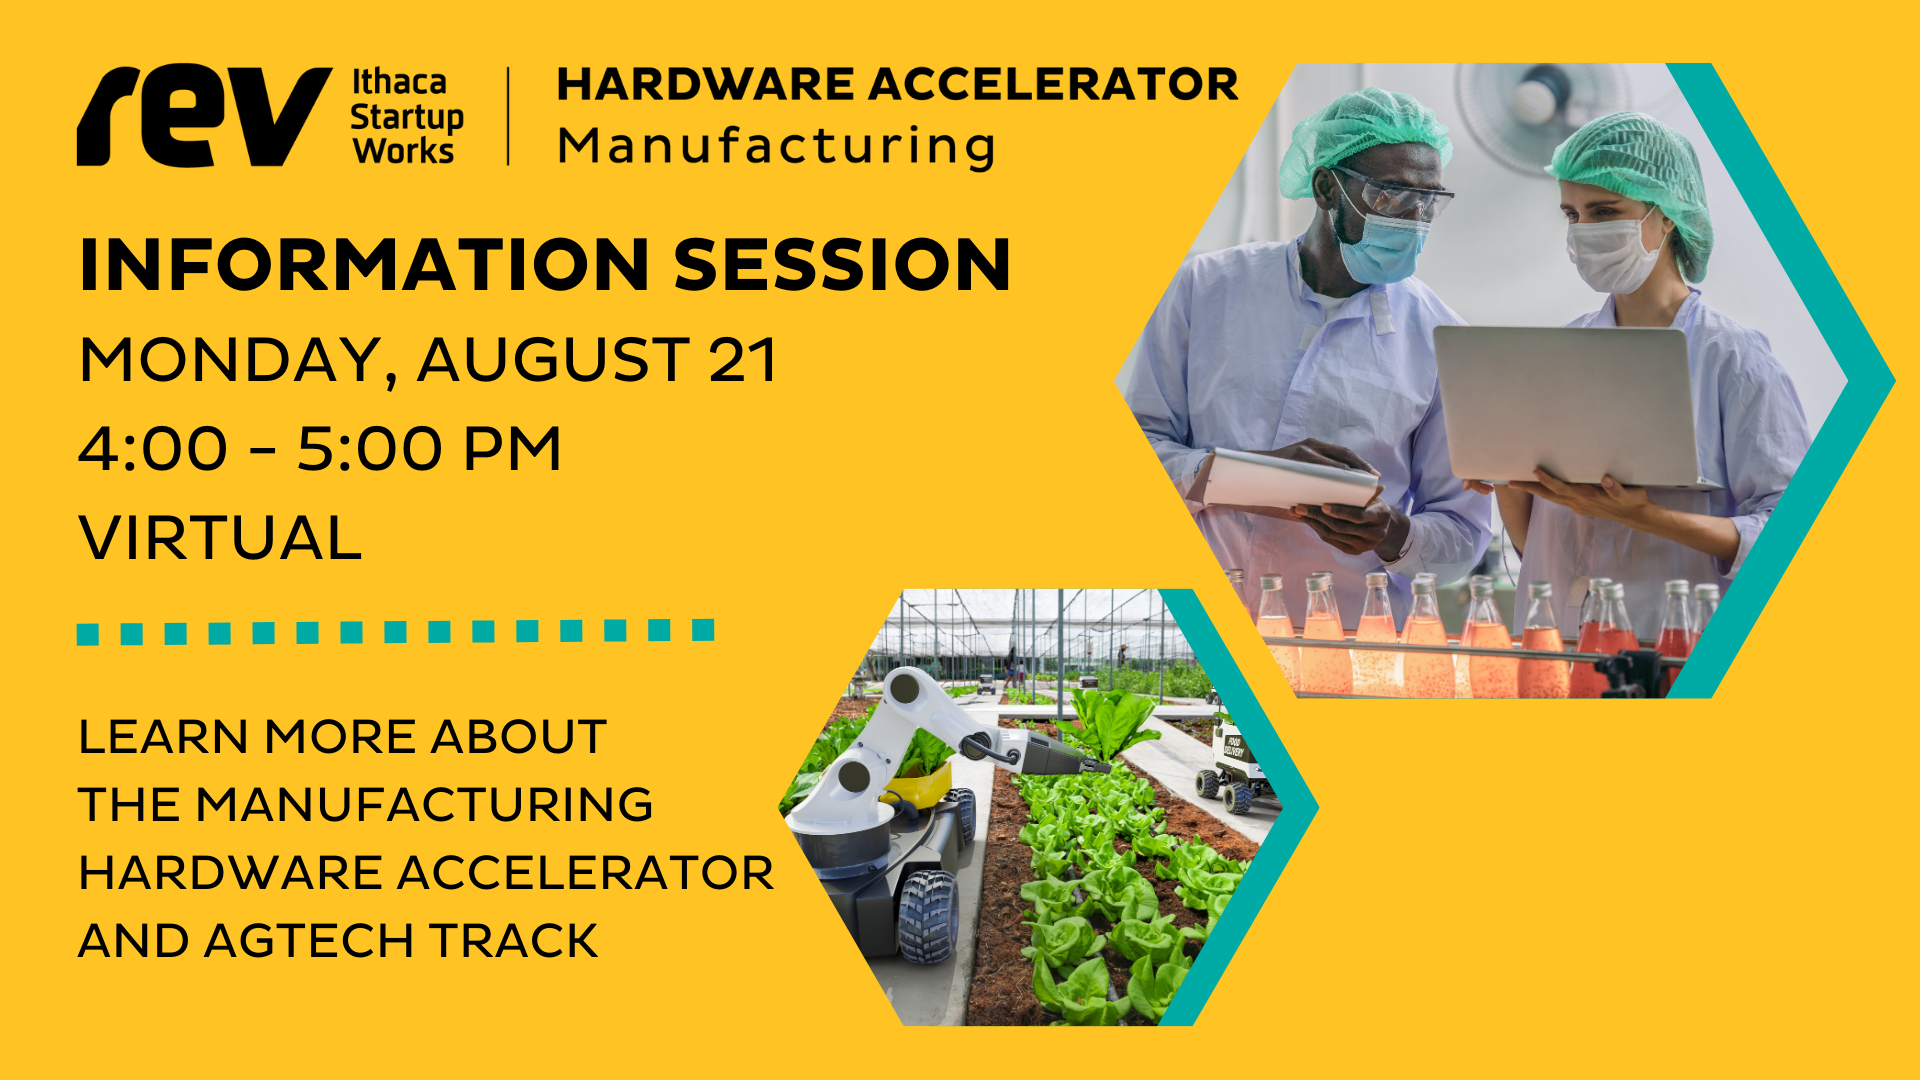 Graphic for August 21st Rev Manufacturing Hardware Accelerator Information Session.